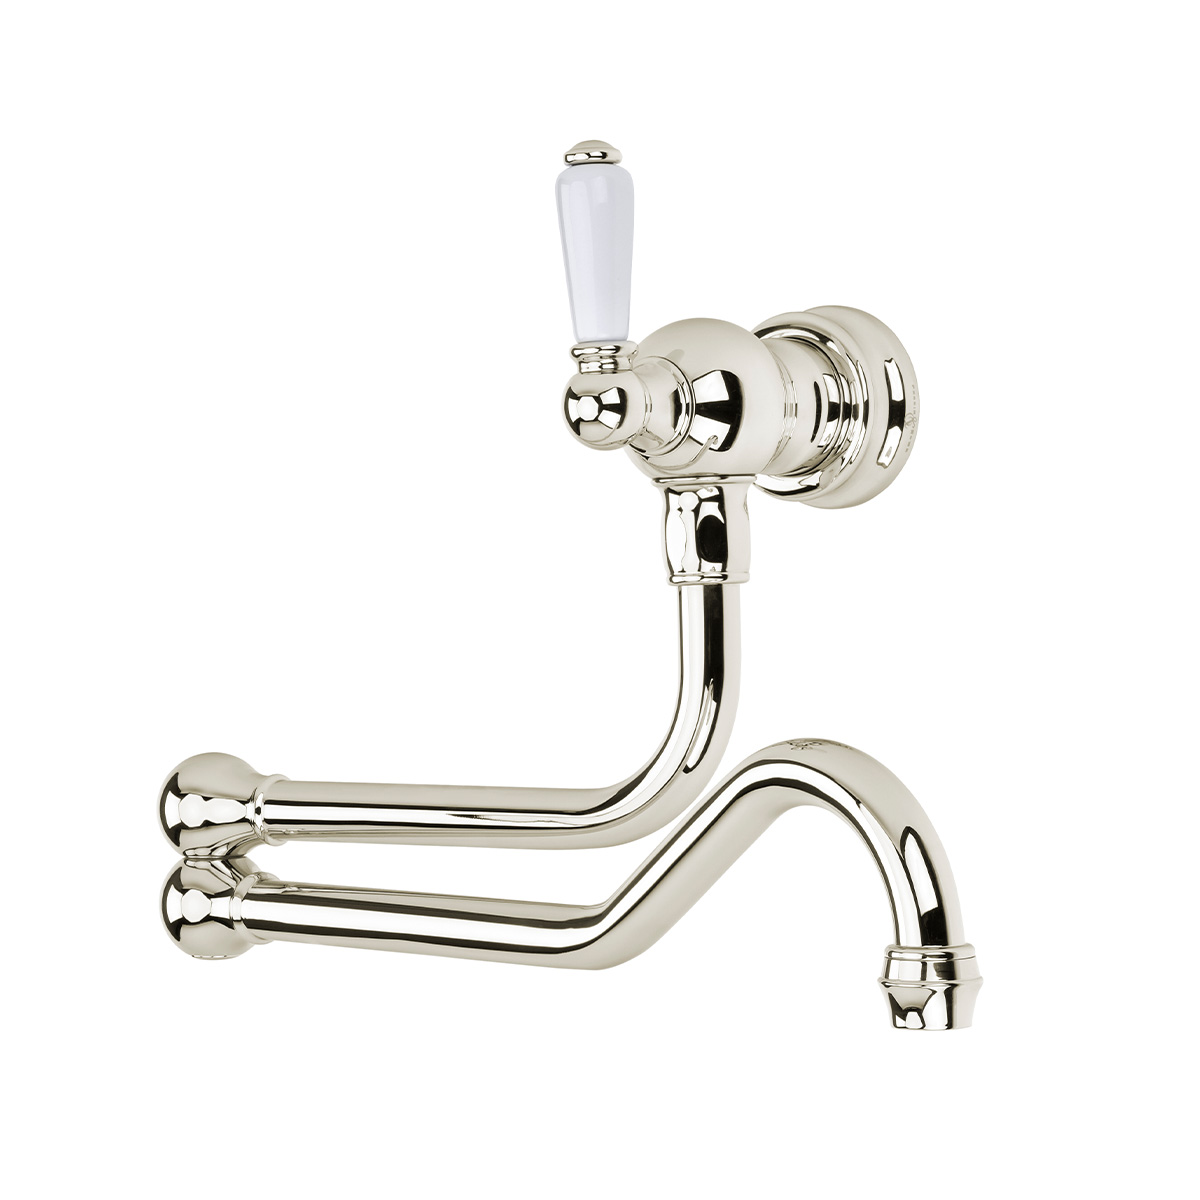 Shaws by Perrin & Rowe wall mounted pot filler in Nickel. Traditional style pot filler with single white porcelain handle - AUSH.4417. Distributed in Australia by Luxe by Design, Brisbane.